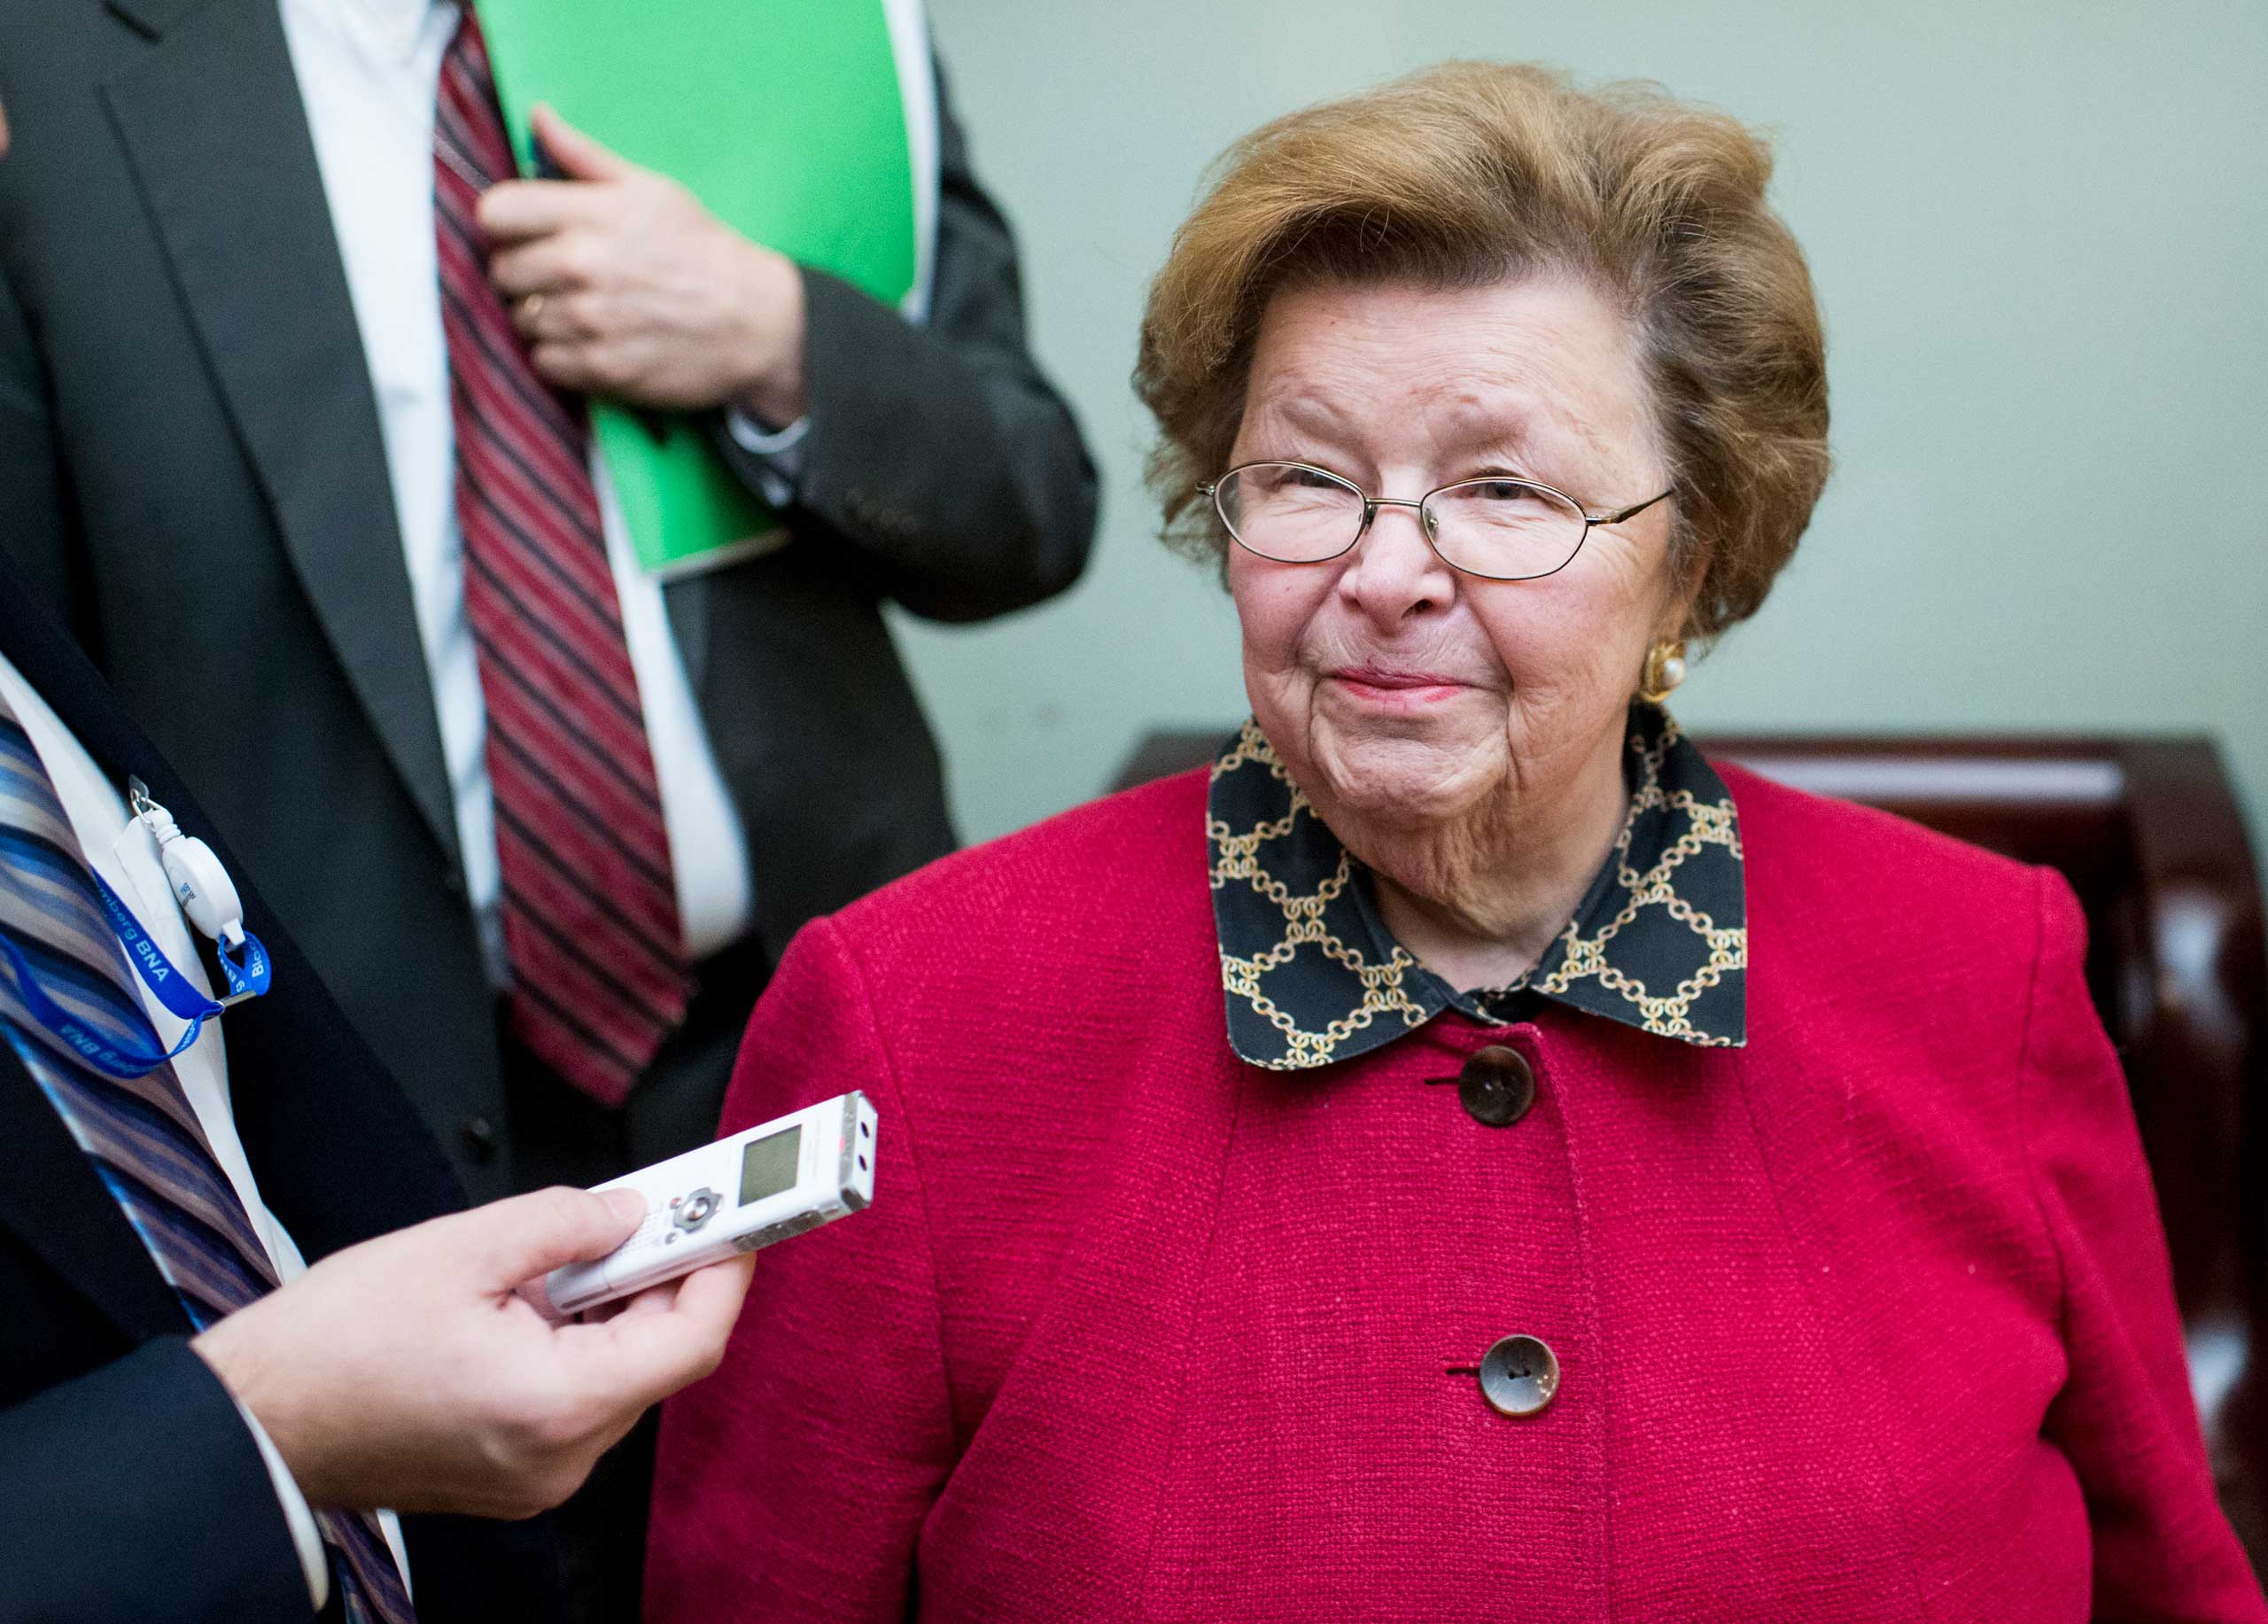 Senator Barbara Mikulsk (D., Md.) speaks with reporters as she arrives for the Senate Democrats' policy lunch on Dec. 9, 2014, in Washington, D.C. (Bill Clark—AP)